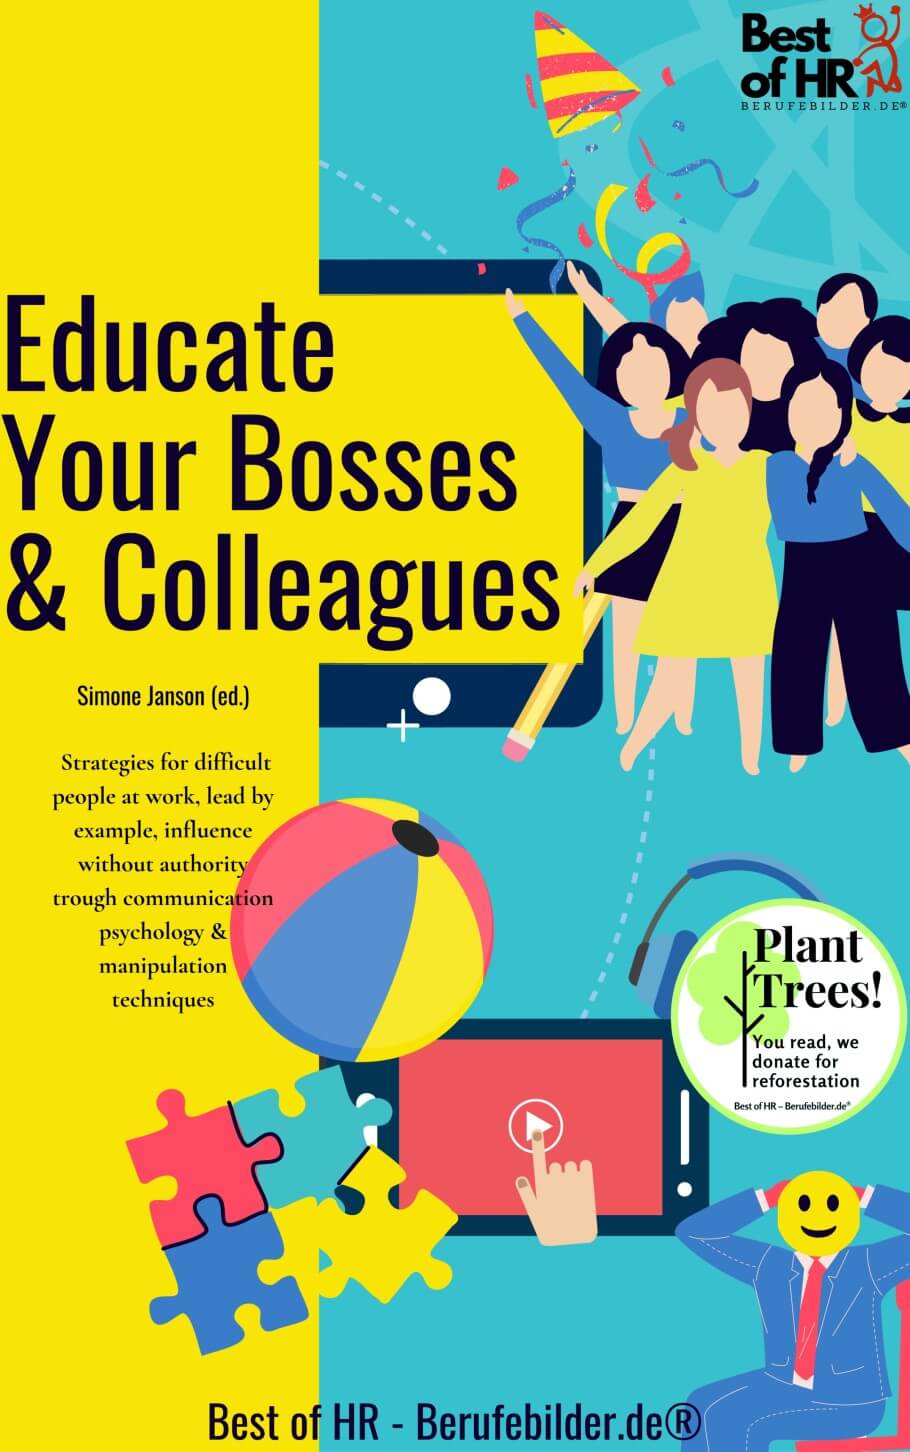 Educate Your Bosses & Colleagues (Engl. Version)